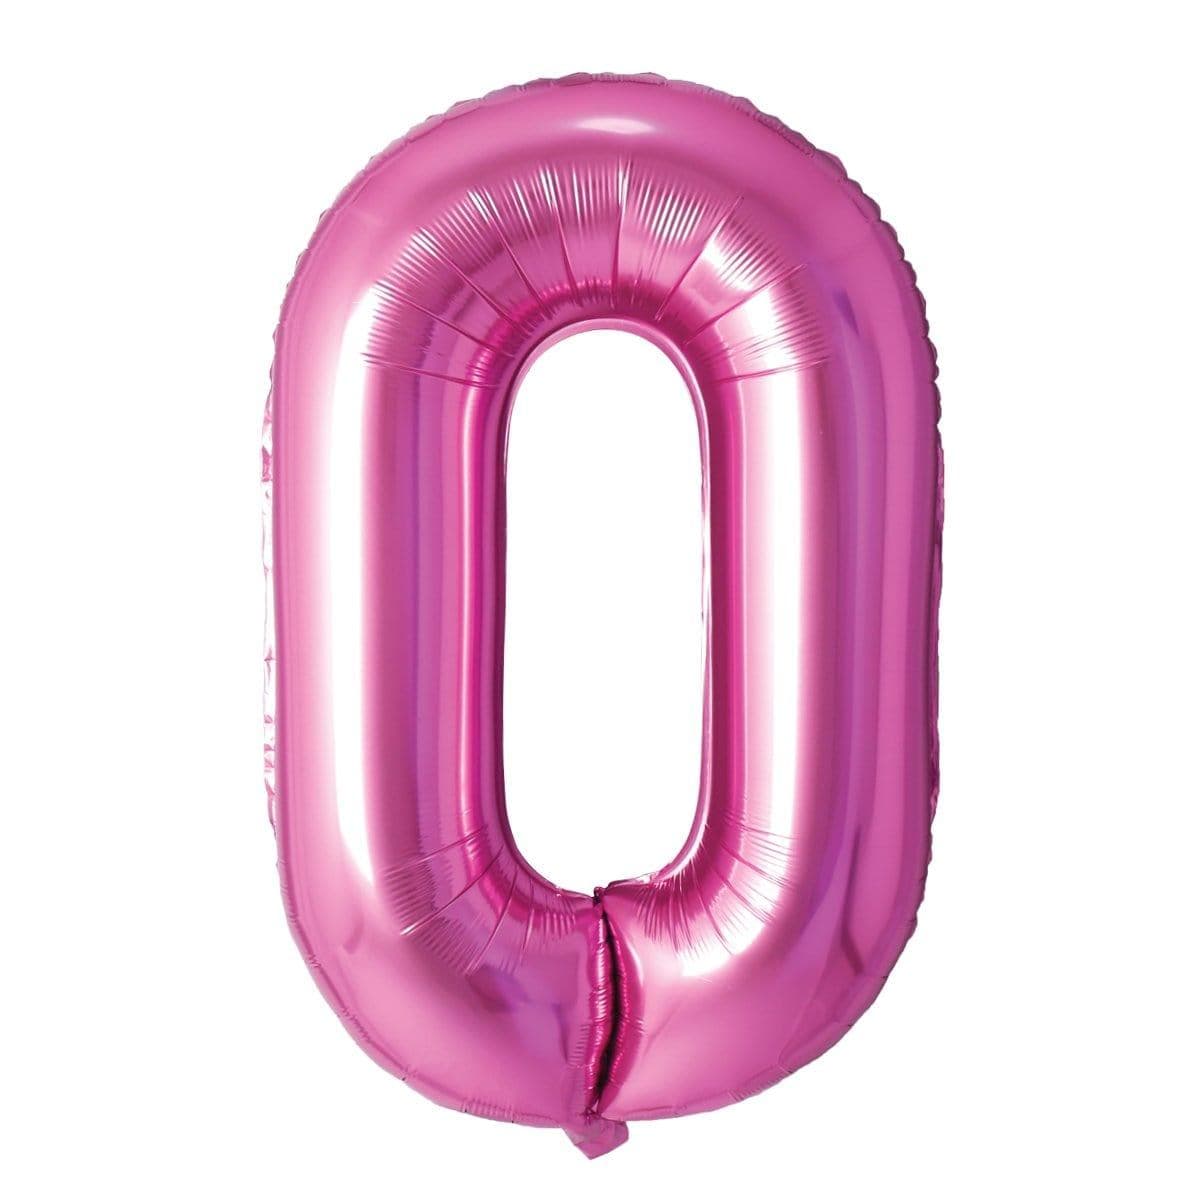 Buy Balloons Pink Number 0 Foil Balloon, 34 Inches sold at Party Expert